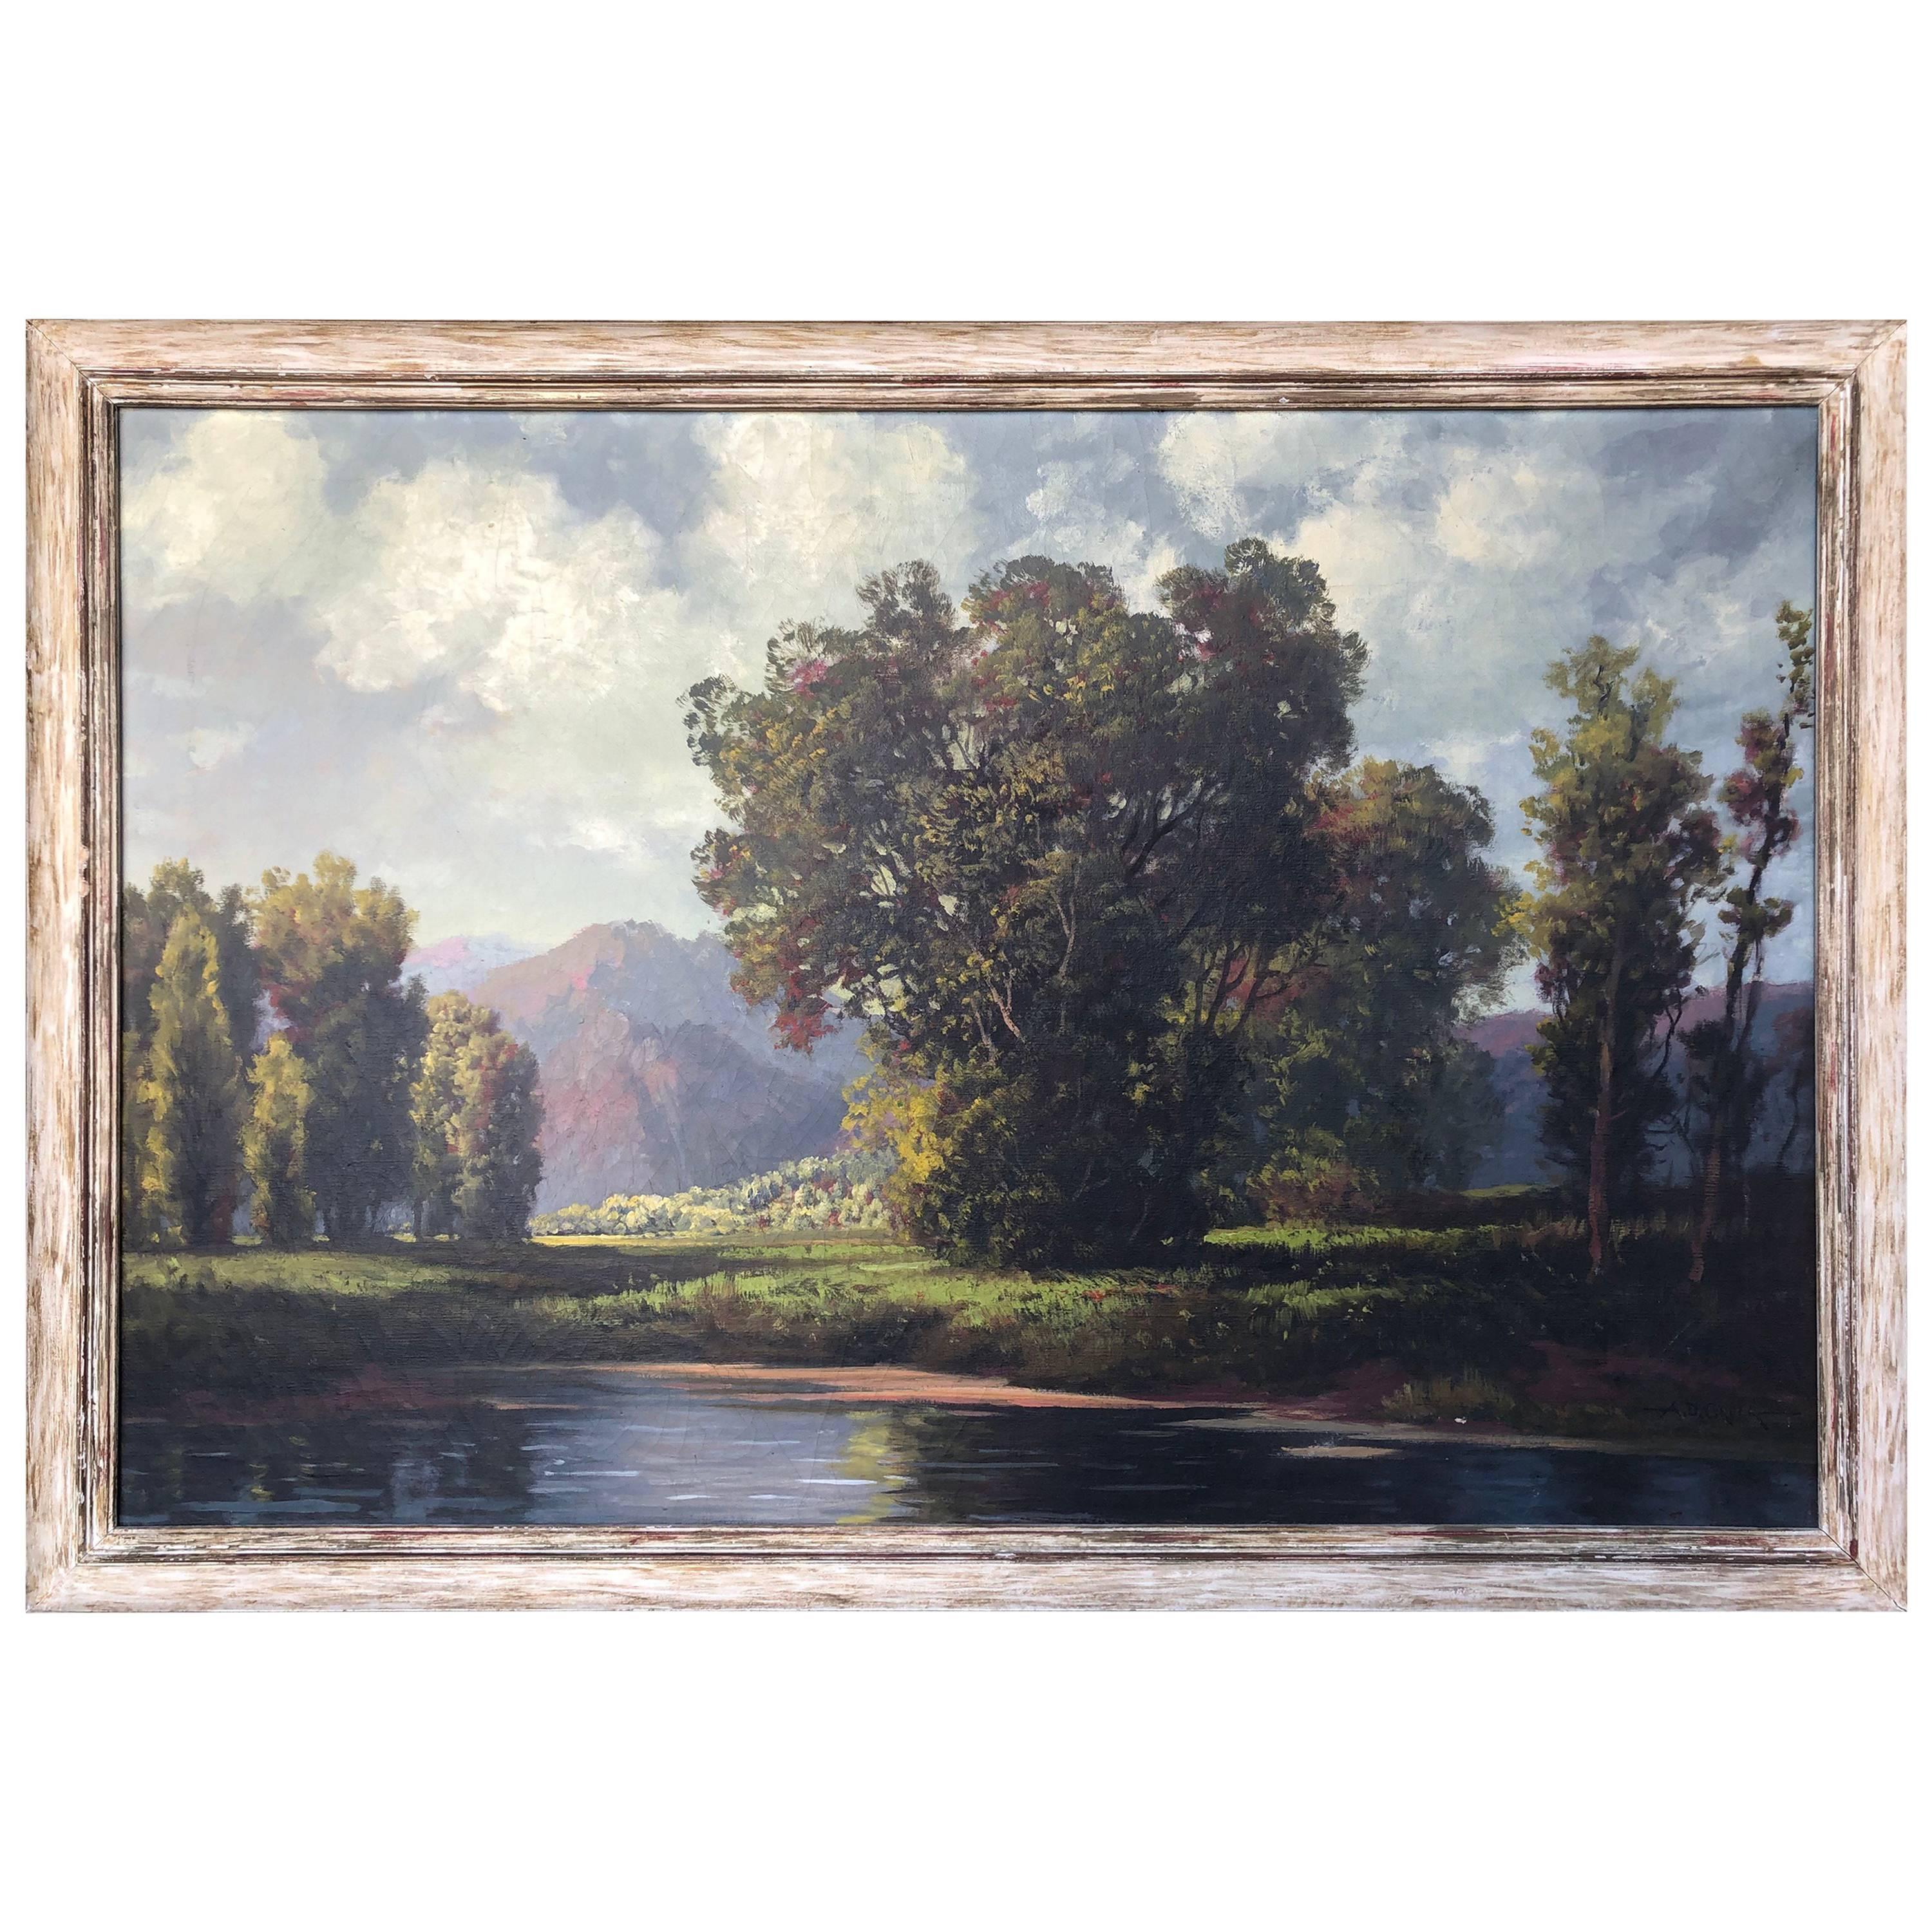 Antique Landscape Oil Painting by A D Greer